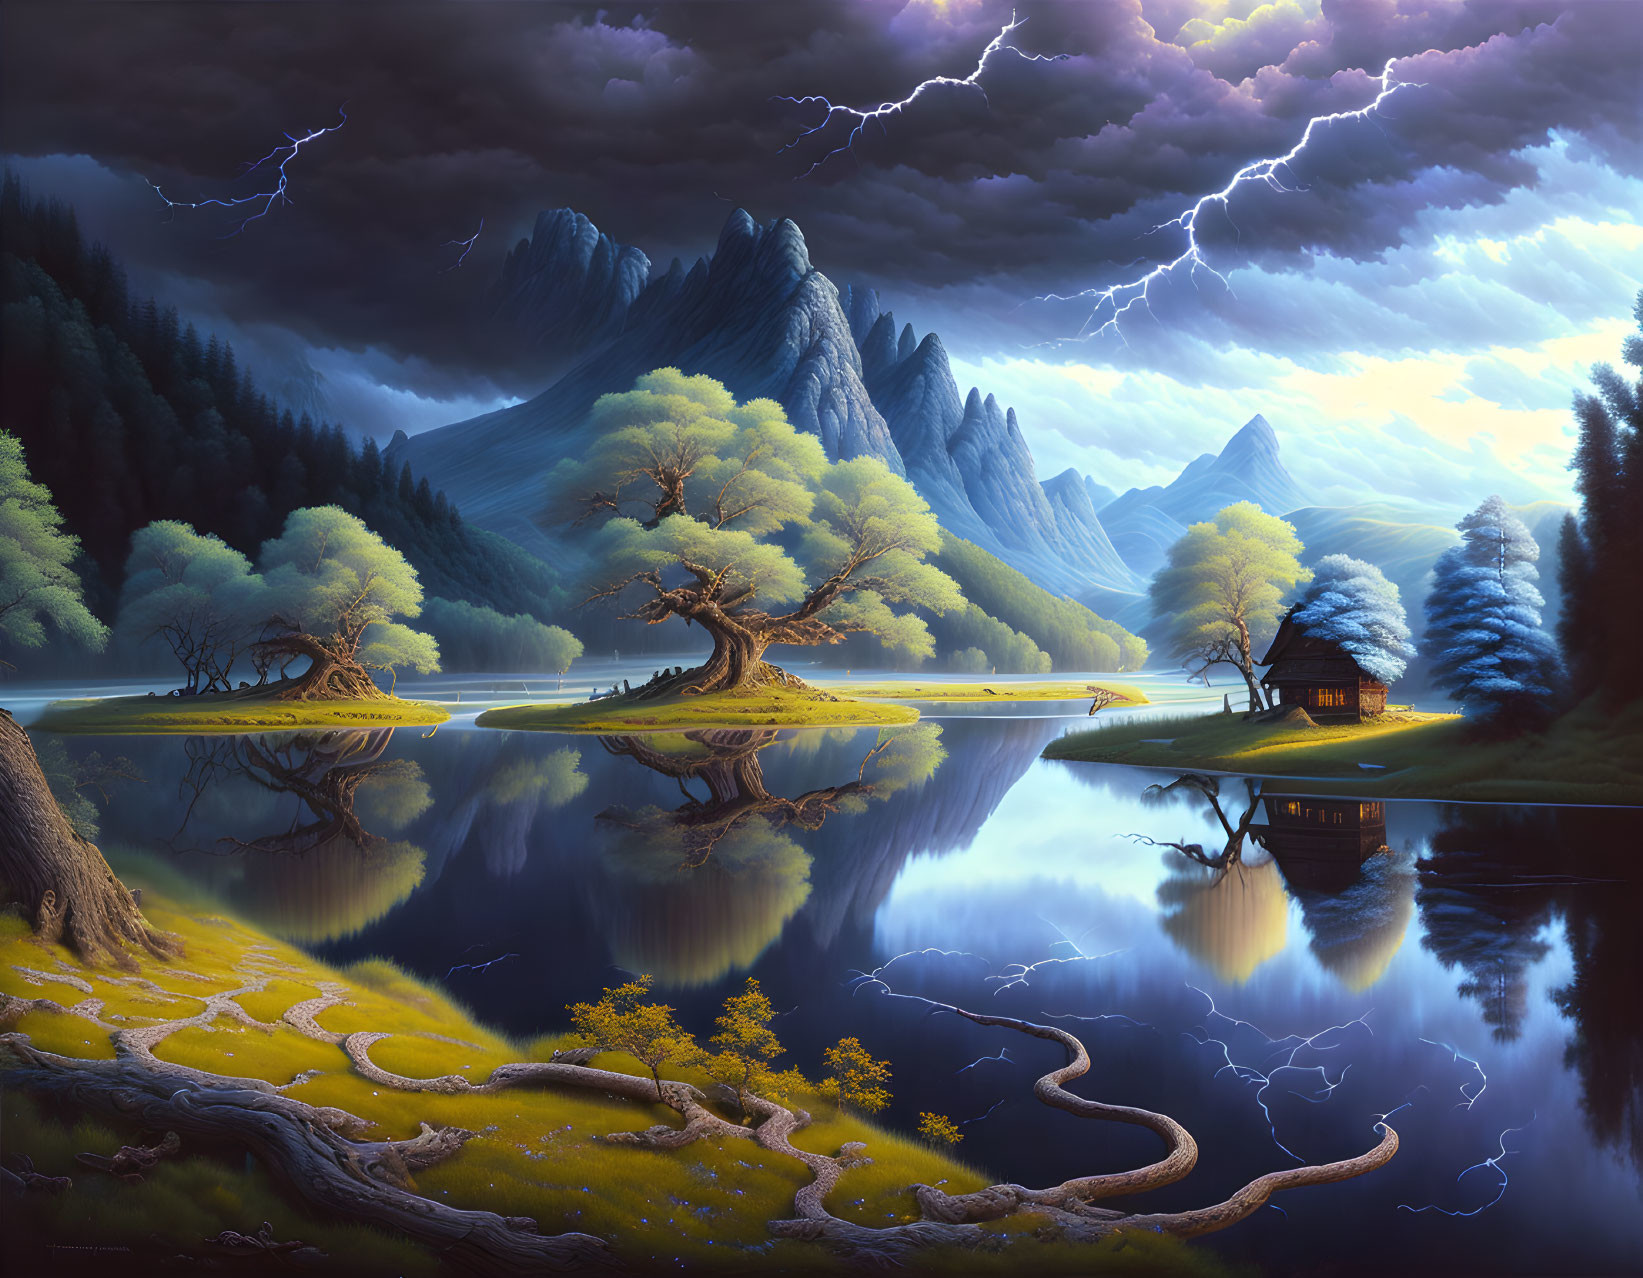 Scenic landscape with mountains, trees, lake, and lightning